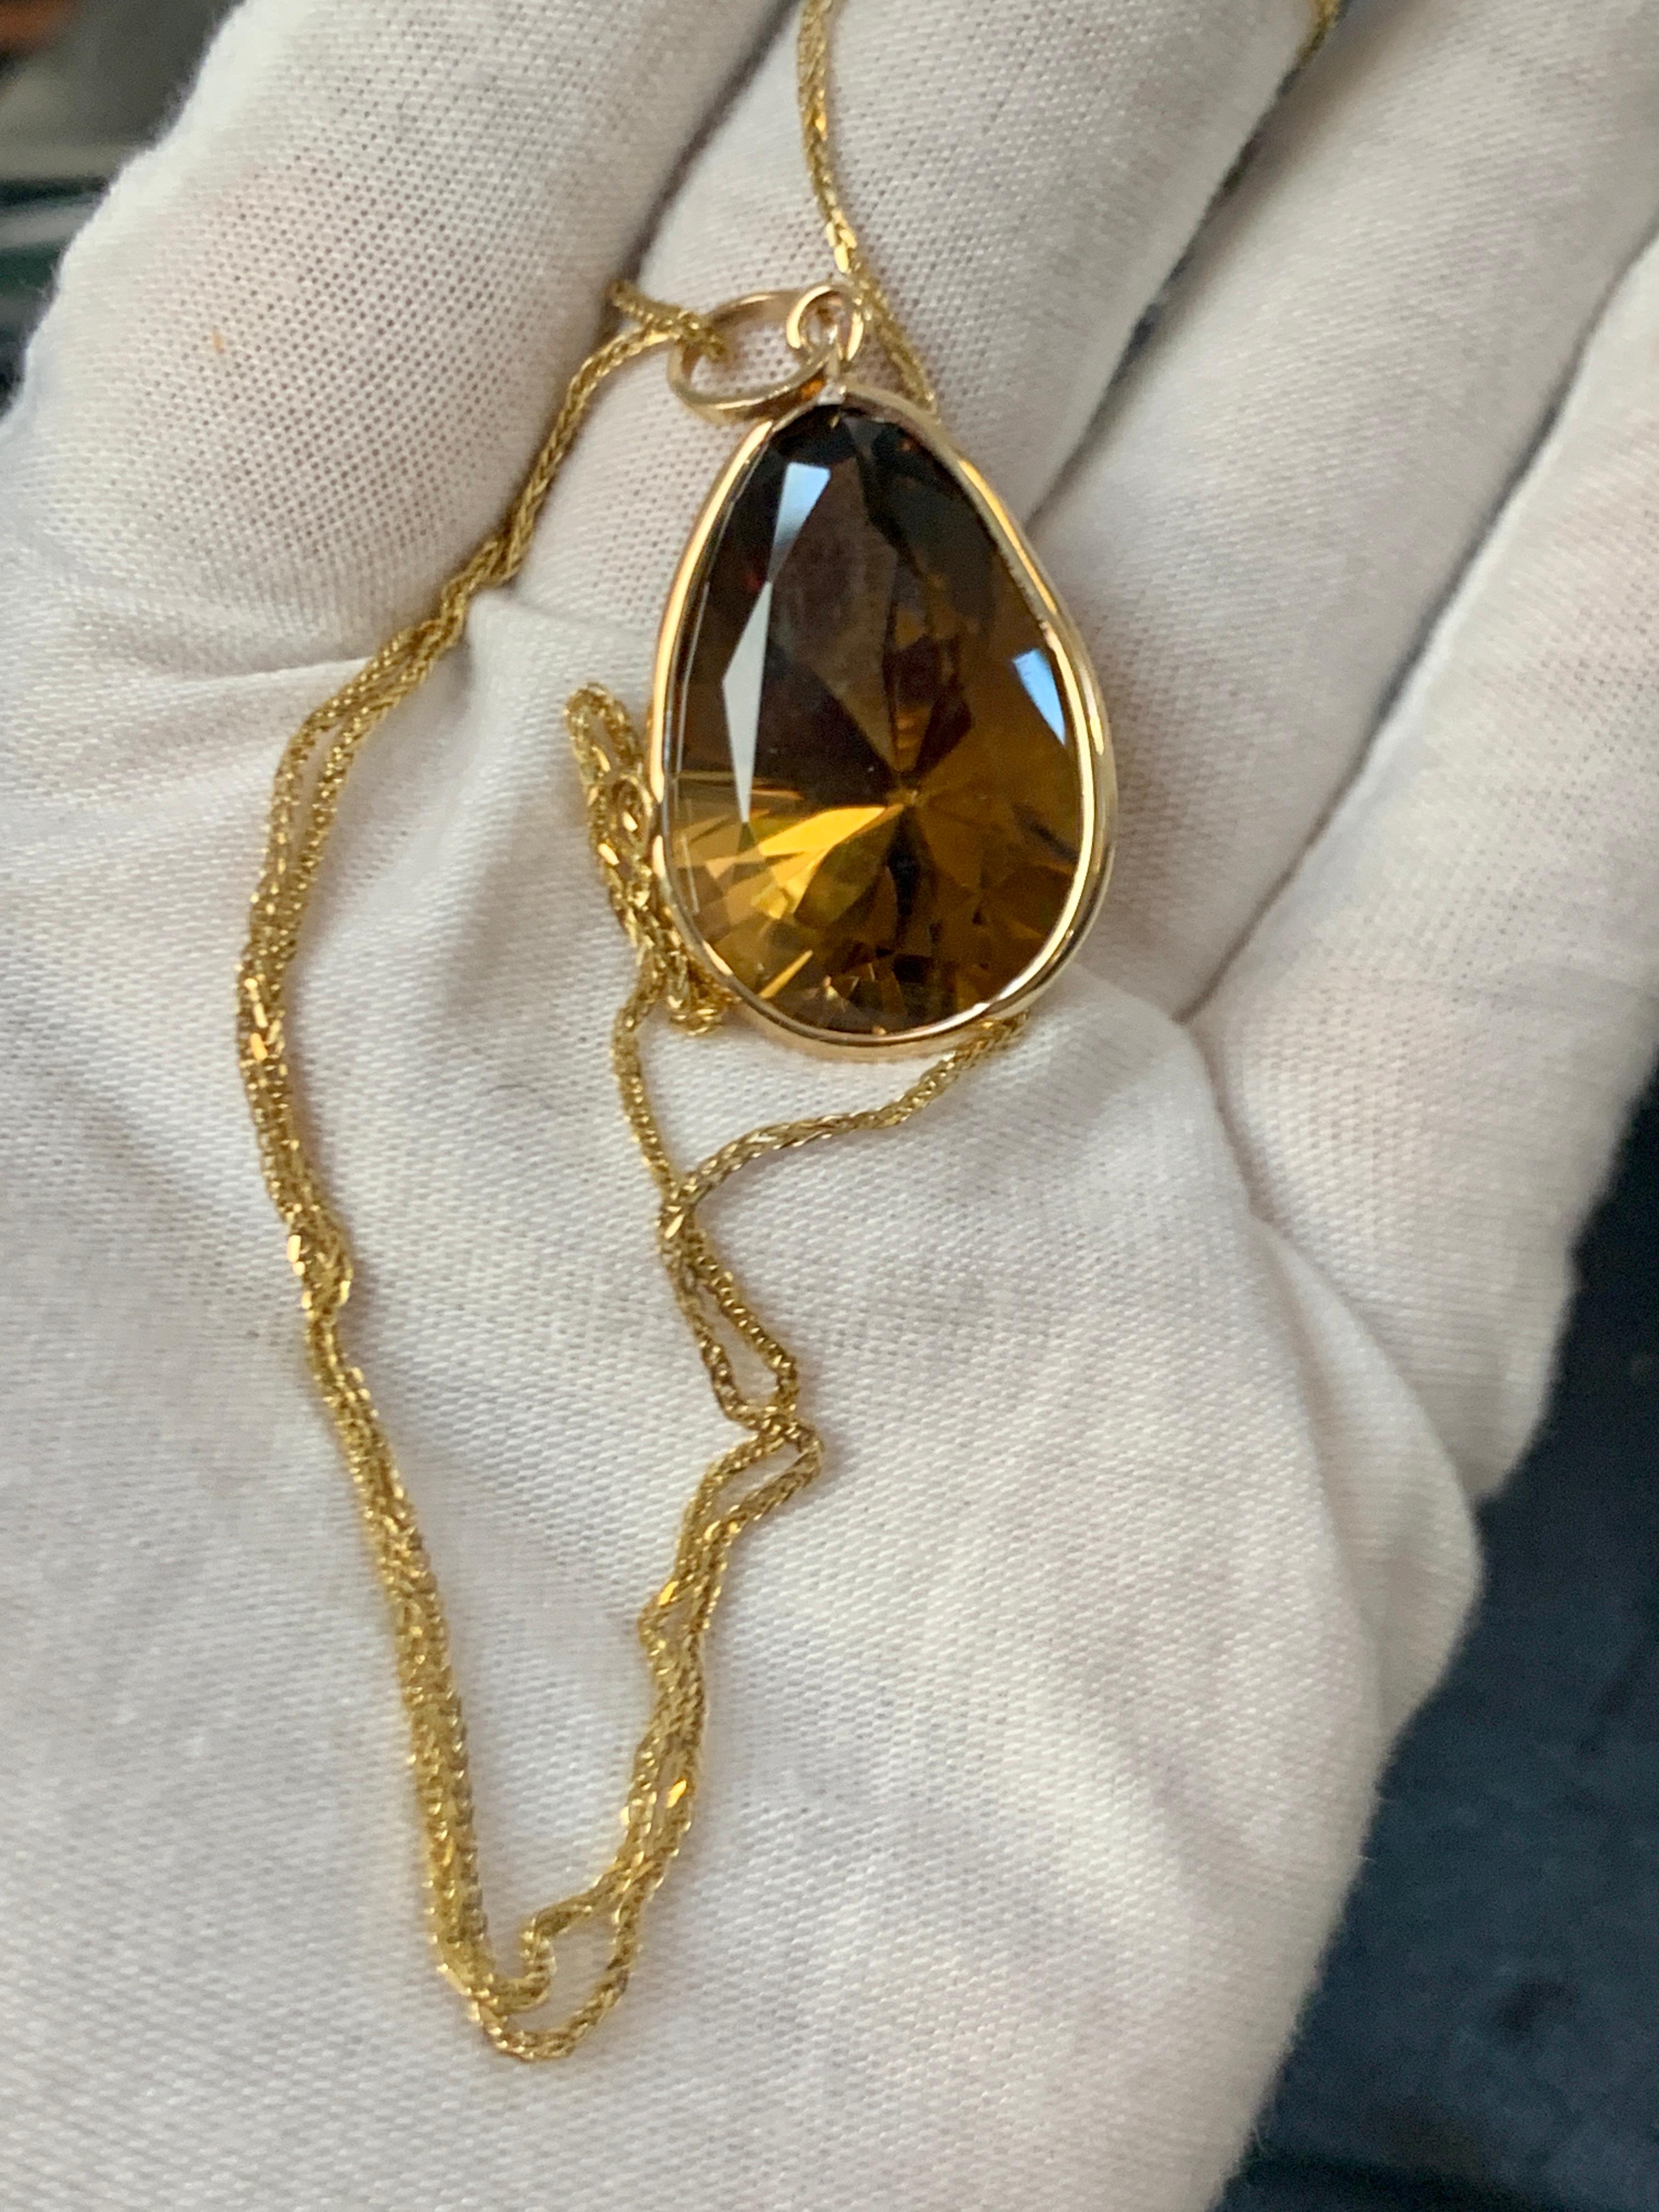 19 Carat Pear Shape Citrine Pendent or Necklace 14 Karat Yellow Gold with Chain 2